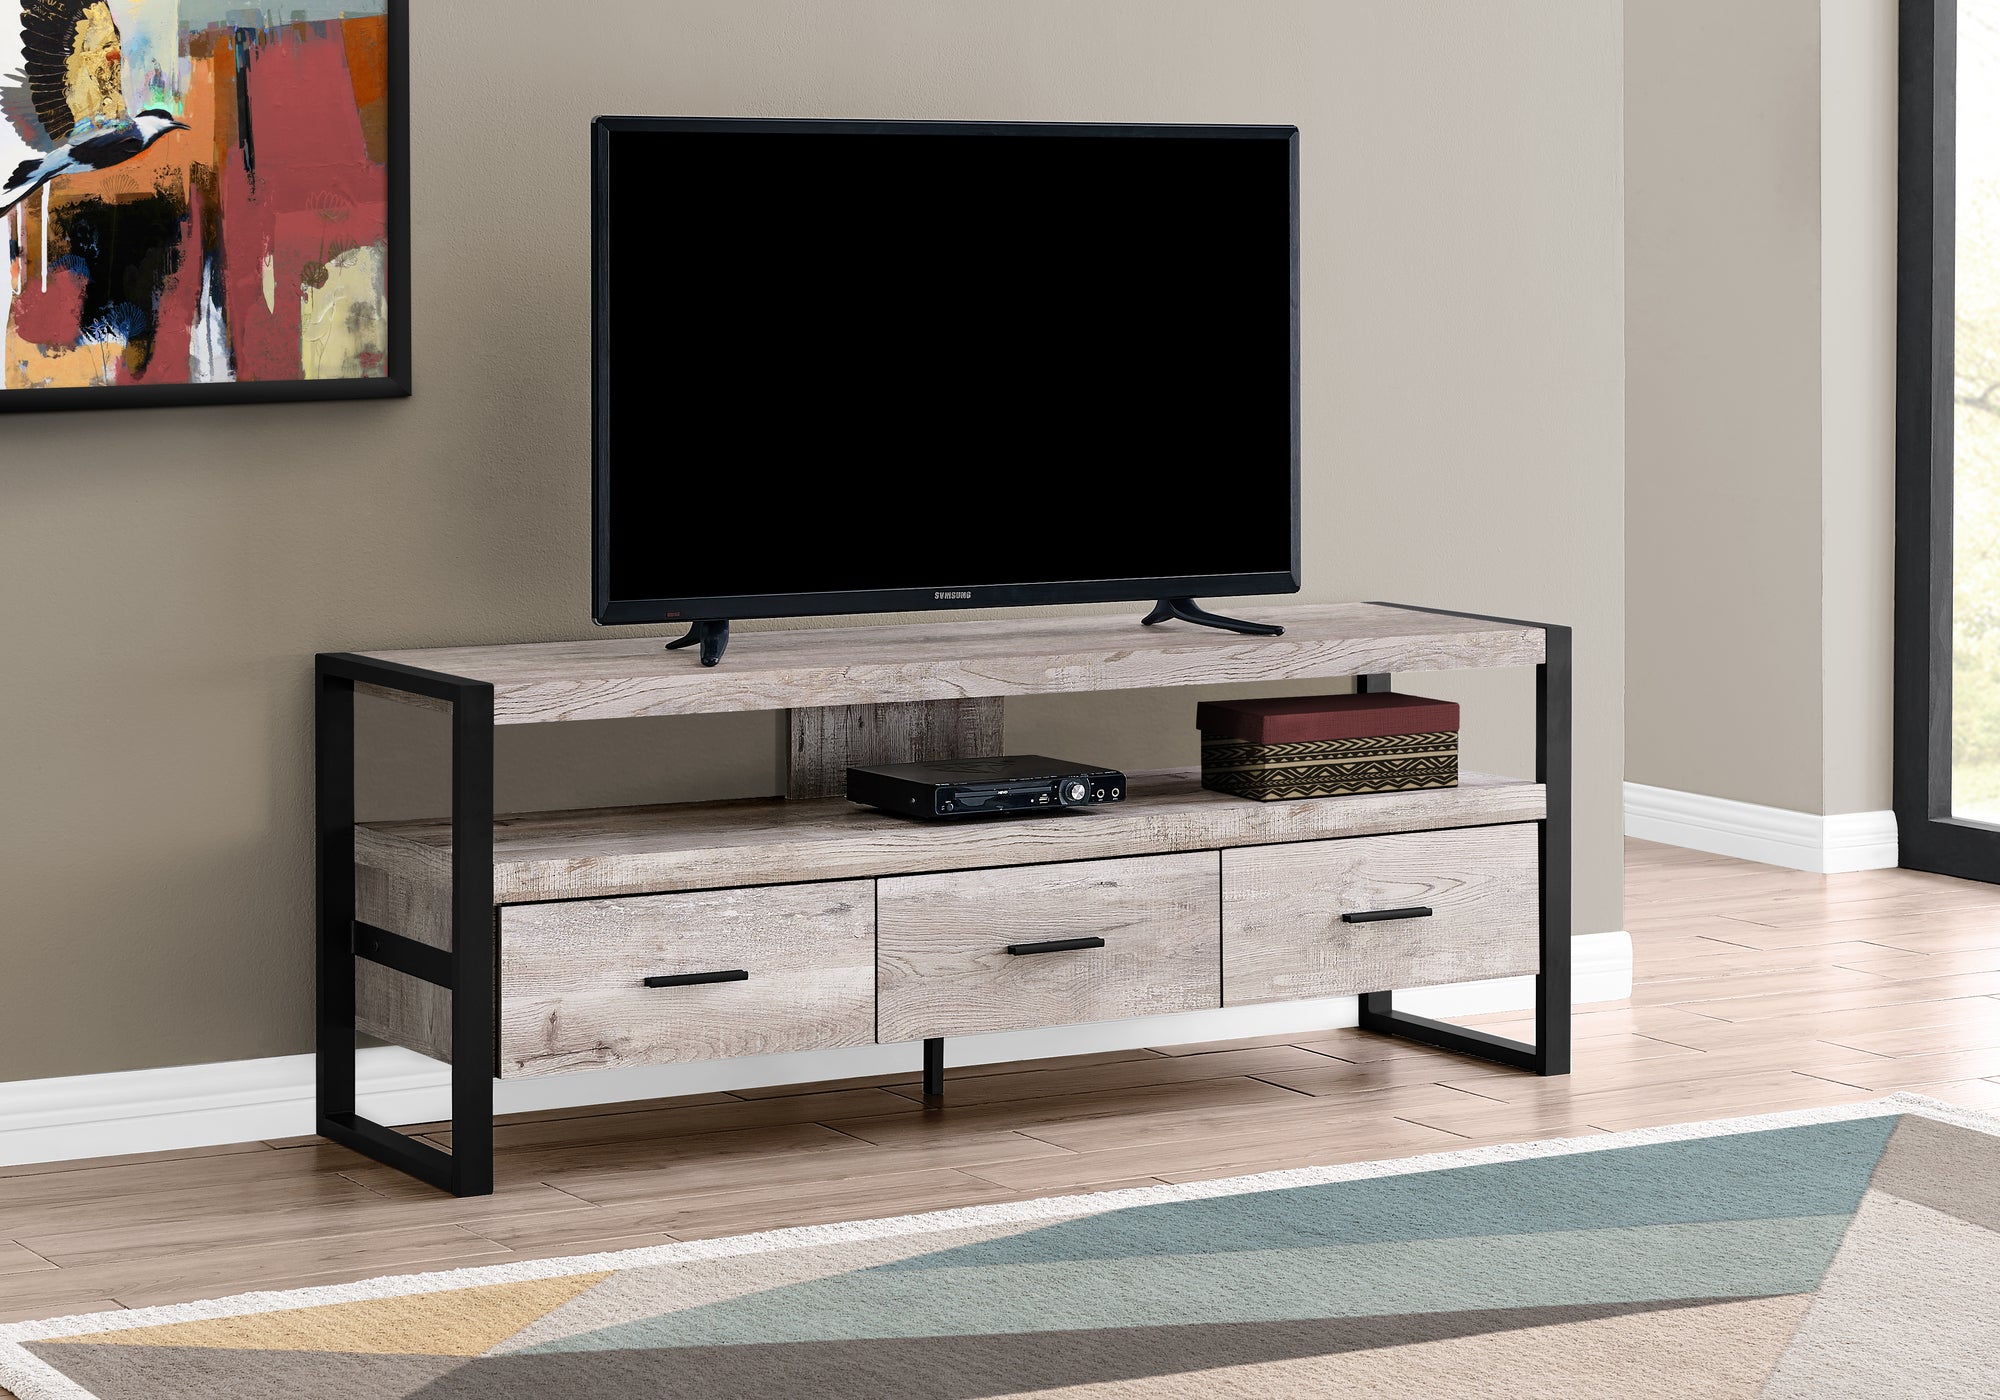 MN-452822    Tv Stand, 60 Inch, Console, Media Entertainment Center, Storage Cabinet, Living Room, Bedroom, Laminate, Metal, Taupe Reclaimed Wood Look, Black, Contemporary, Modern